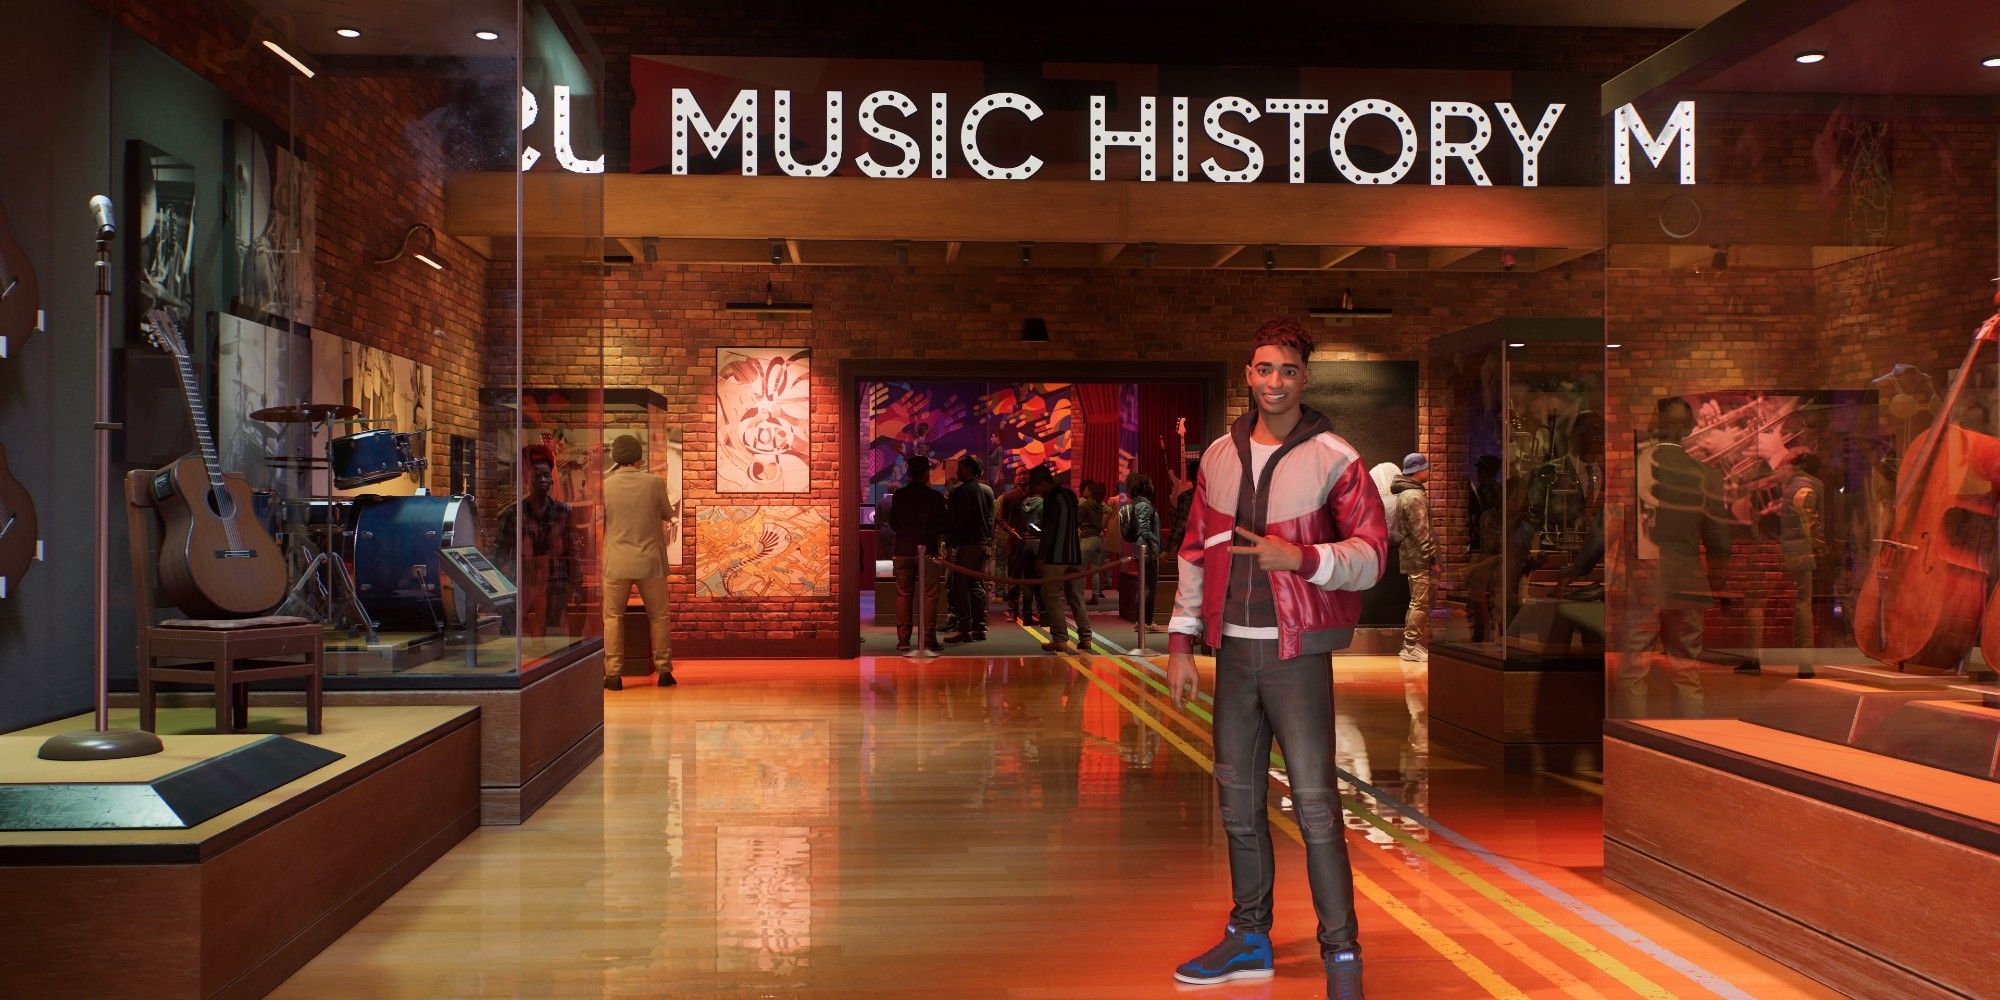 Miles posing in front of the music history musem